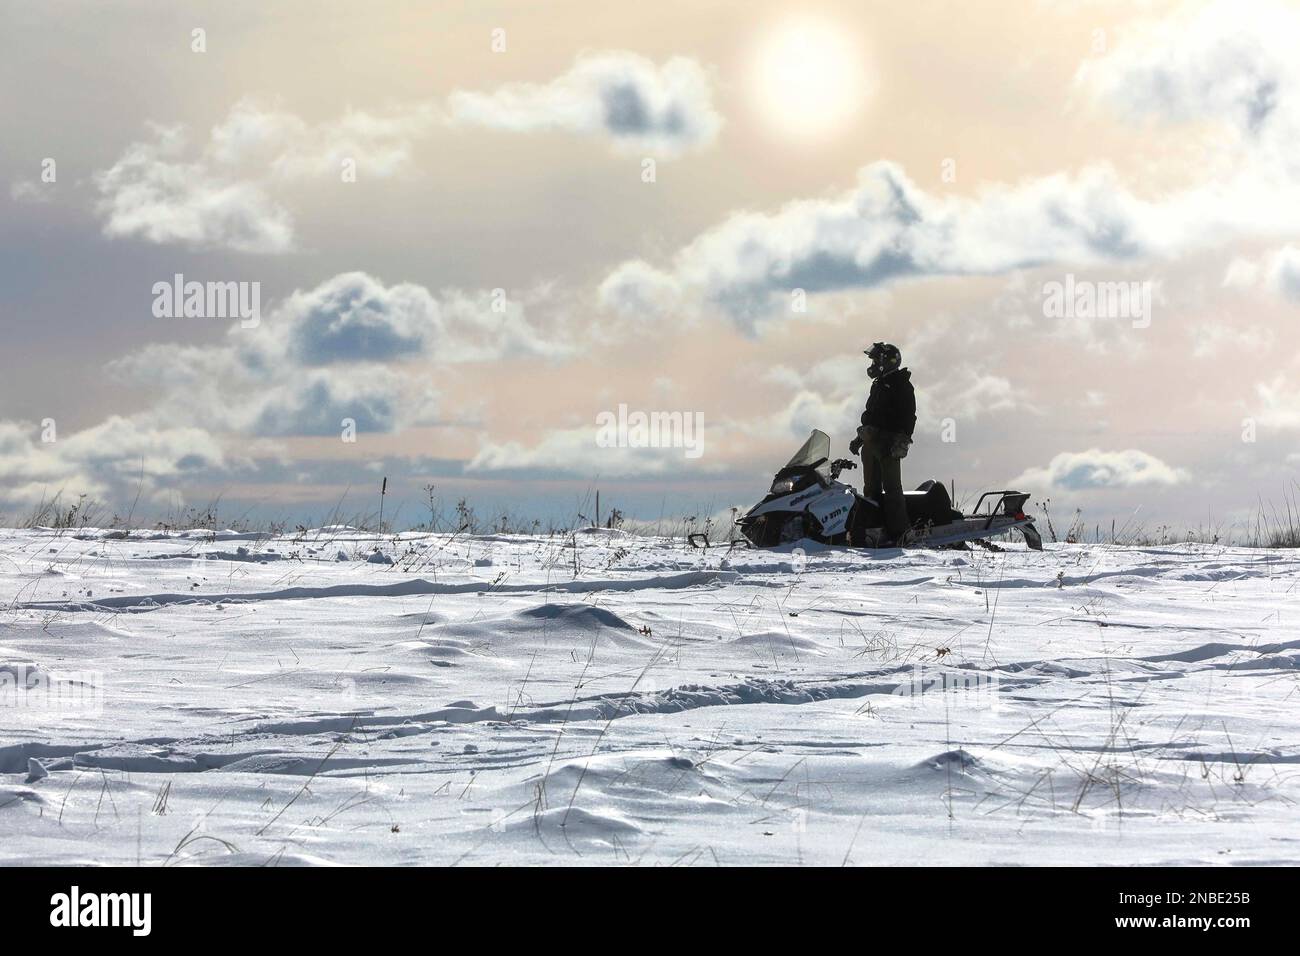 LITTLE FALLS, Minn. (Feb. 9, 2023) – A U.S. Navy Explosive Ordnance Disposal (EOD) Technician, assigned to EOD Mobile Unit Two, stands in a snowmobile during Arctic mobility training in Little Falls, Minnesota, Feb. 9, 2023 during Snow Crab Exercise 23-1, an exercise designed to test and evaluate U.S. Navy Explosive Ordnance Disposal’s (EOD) and Navy Diver’s capabilities and equipment in a simulated Arctic environment and improve combat effectiveness. Navy EOD and Navy Divers are part of the Navy Expeditionary Combat Force (NECF), enabling the U.S. Navy Fleet by clearing and protecting the bat Stock Photo